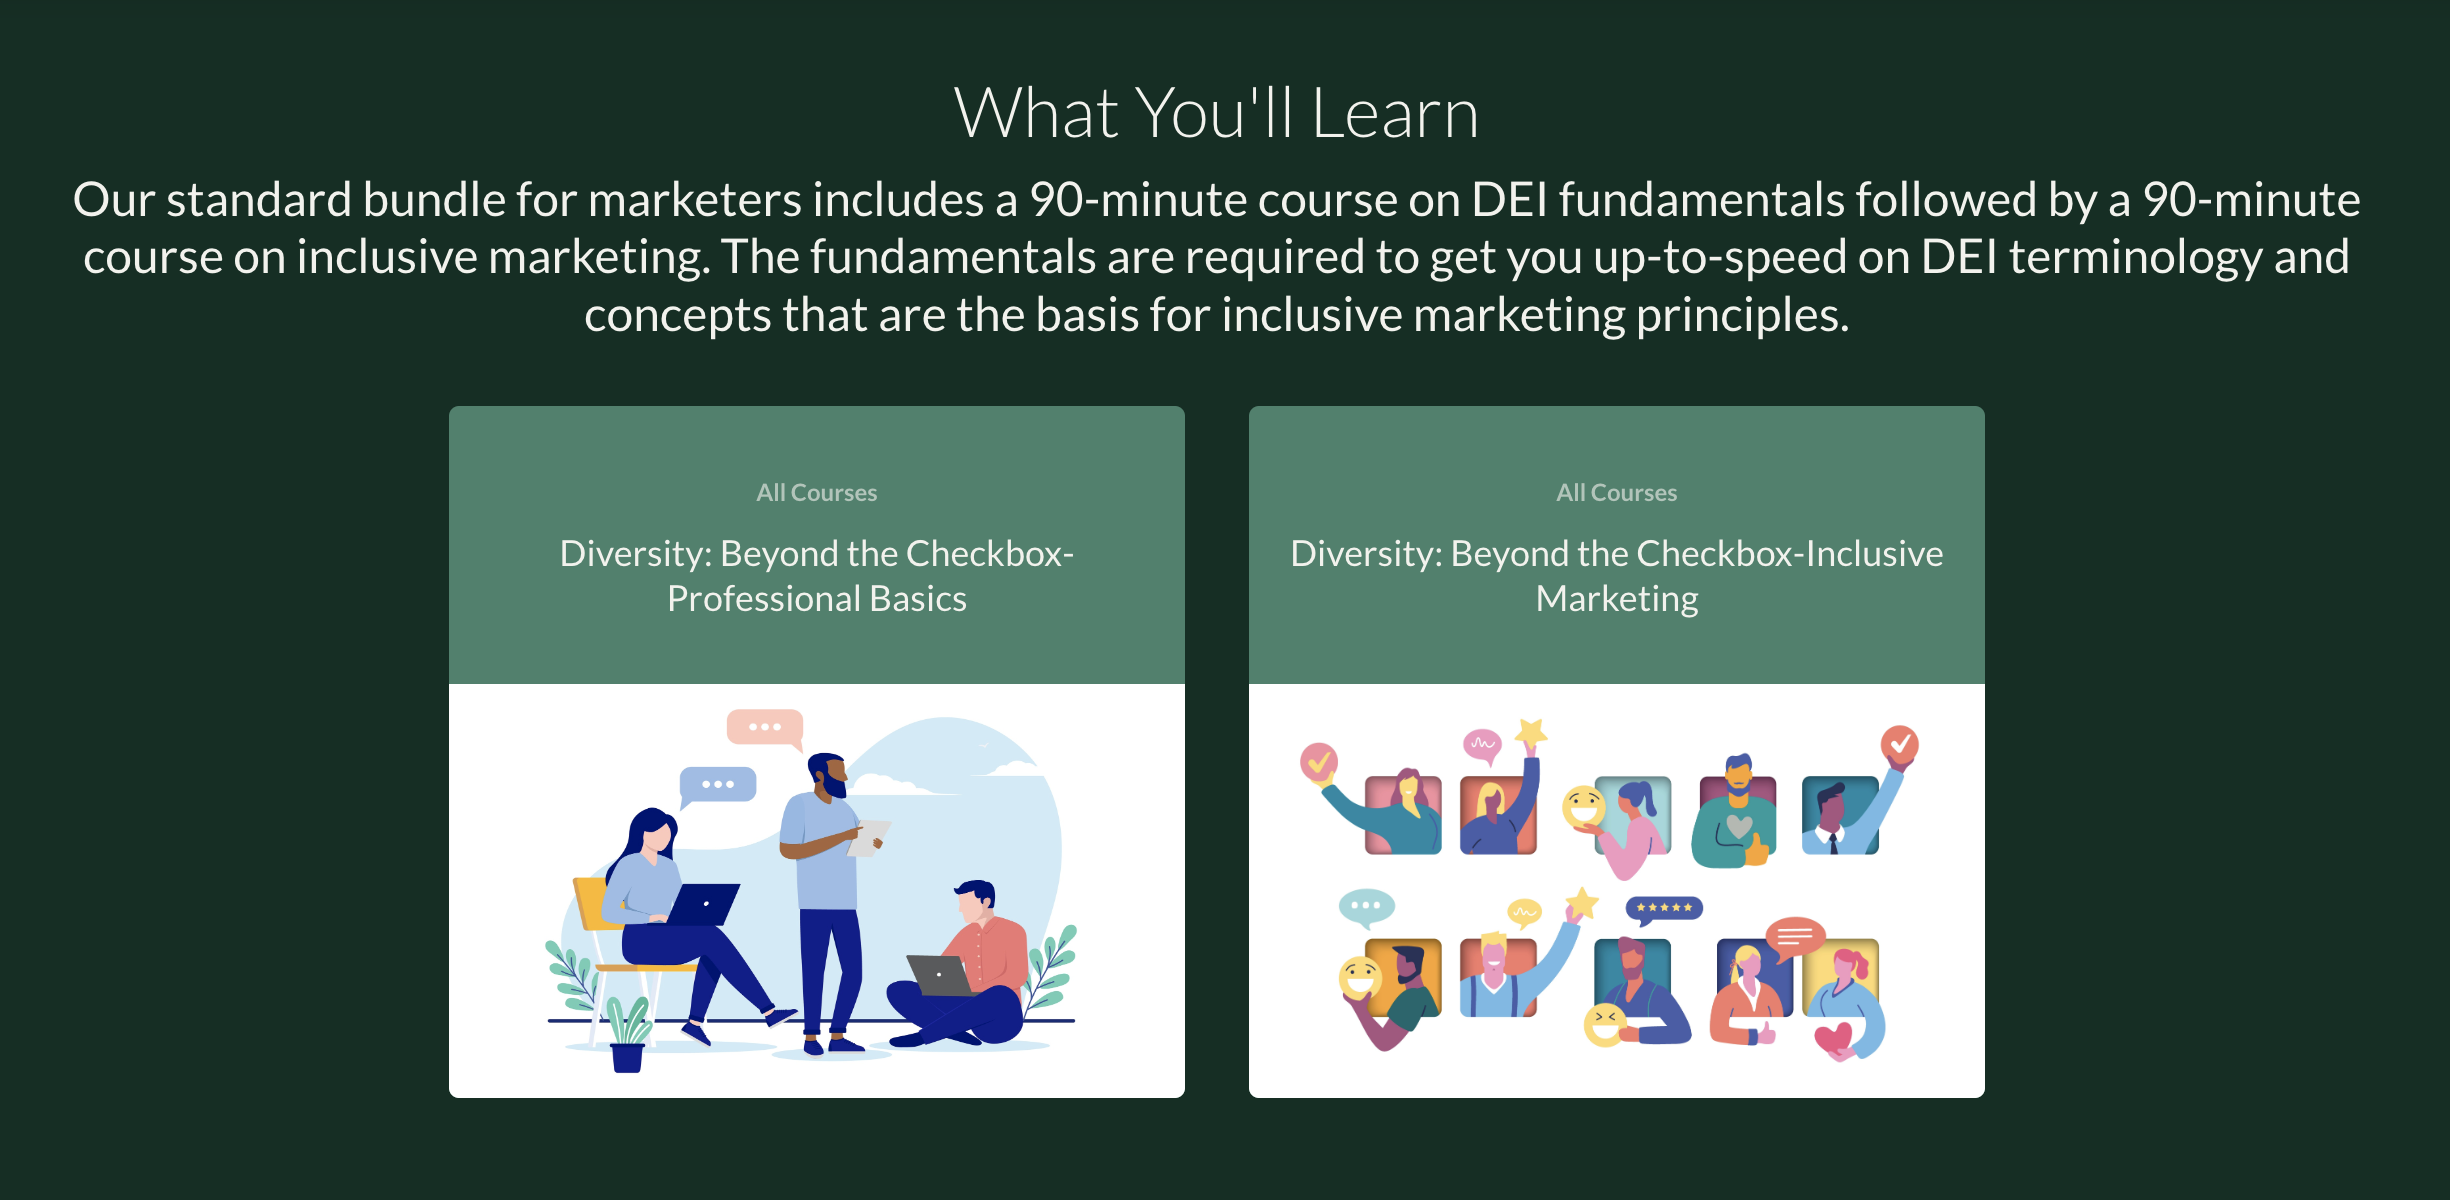 What You'll Learn Our standard bundle for marketers includes a 90-minute course on DEI fundamentals followed by a 90-minute course on inclusive marketing. The fundamentals are required to get you up-to-speed on DEI terminology and concepts that are the basis for inclusive marketing principles.